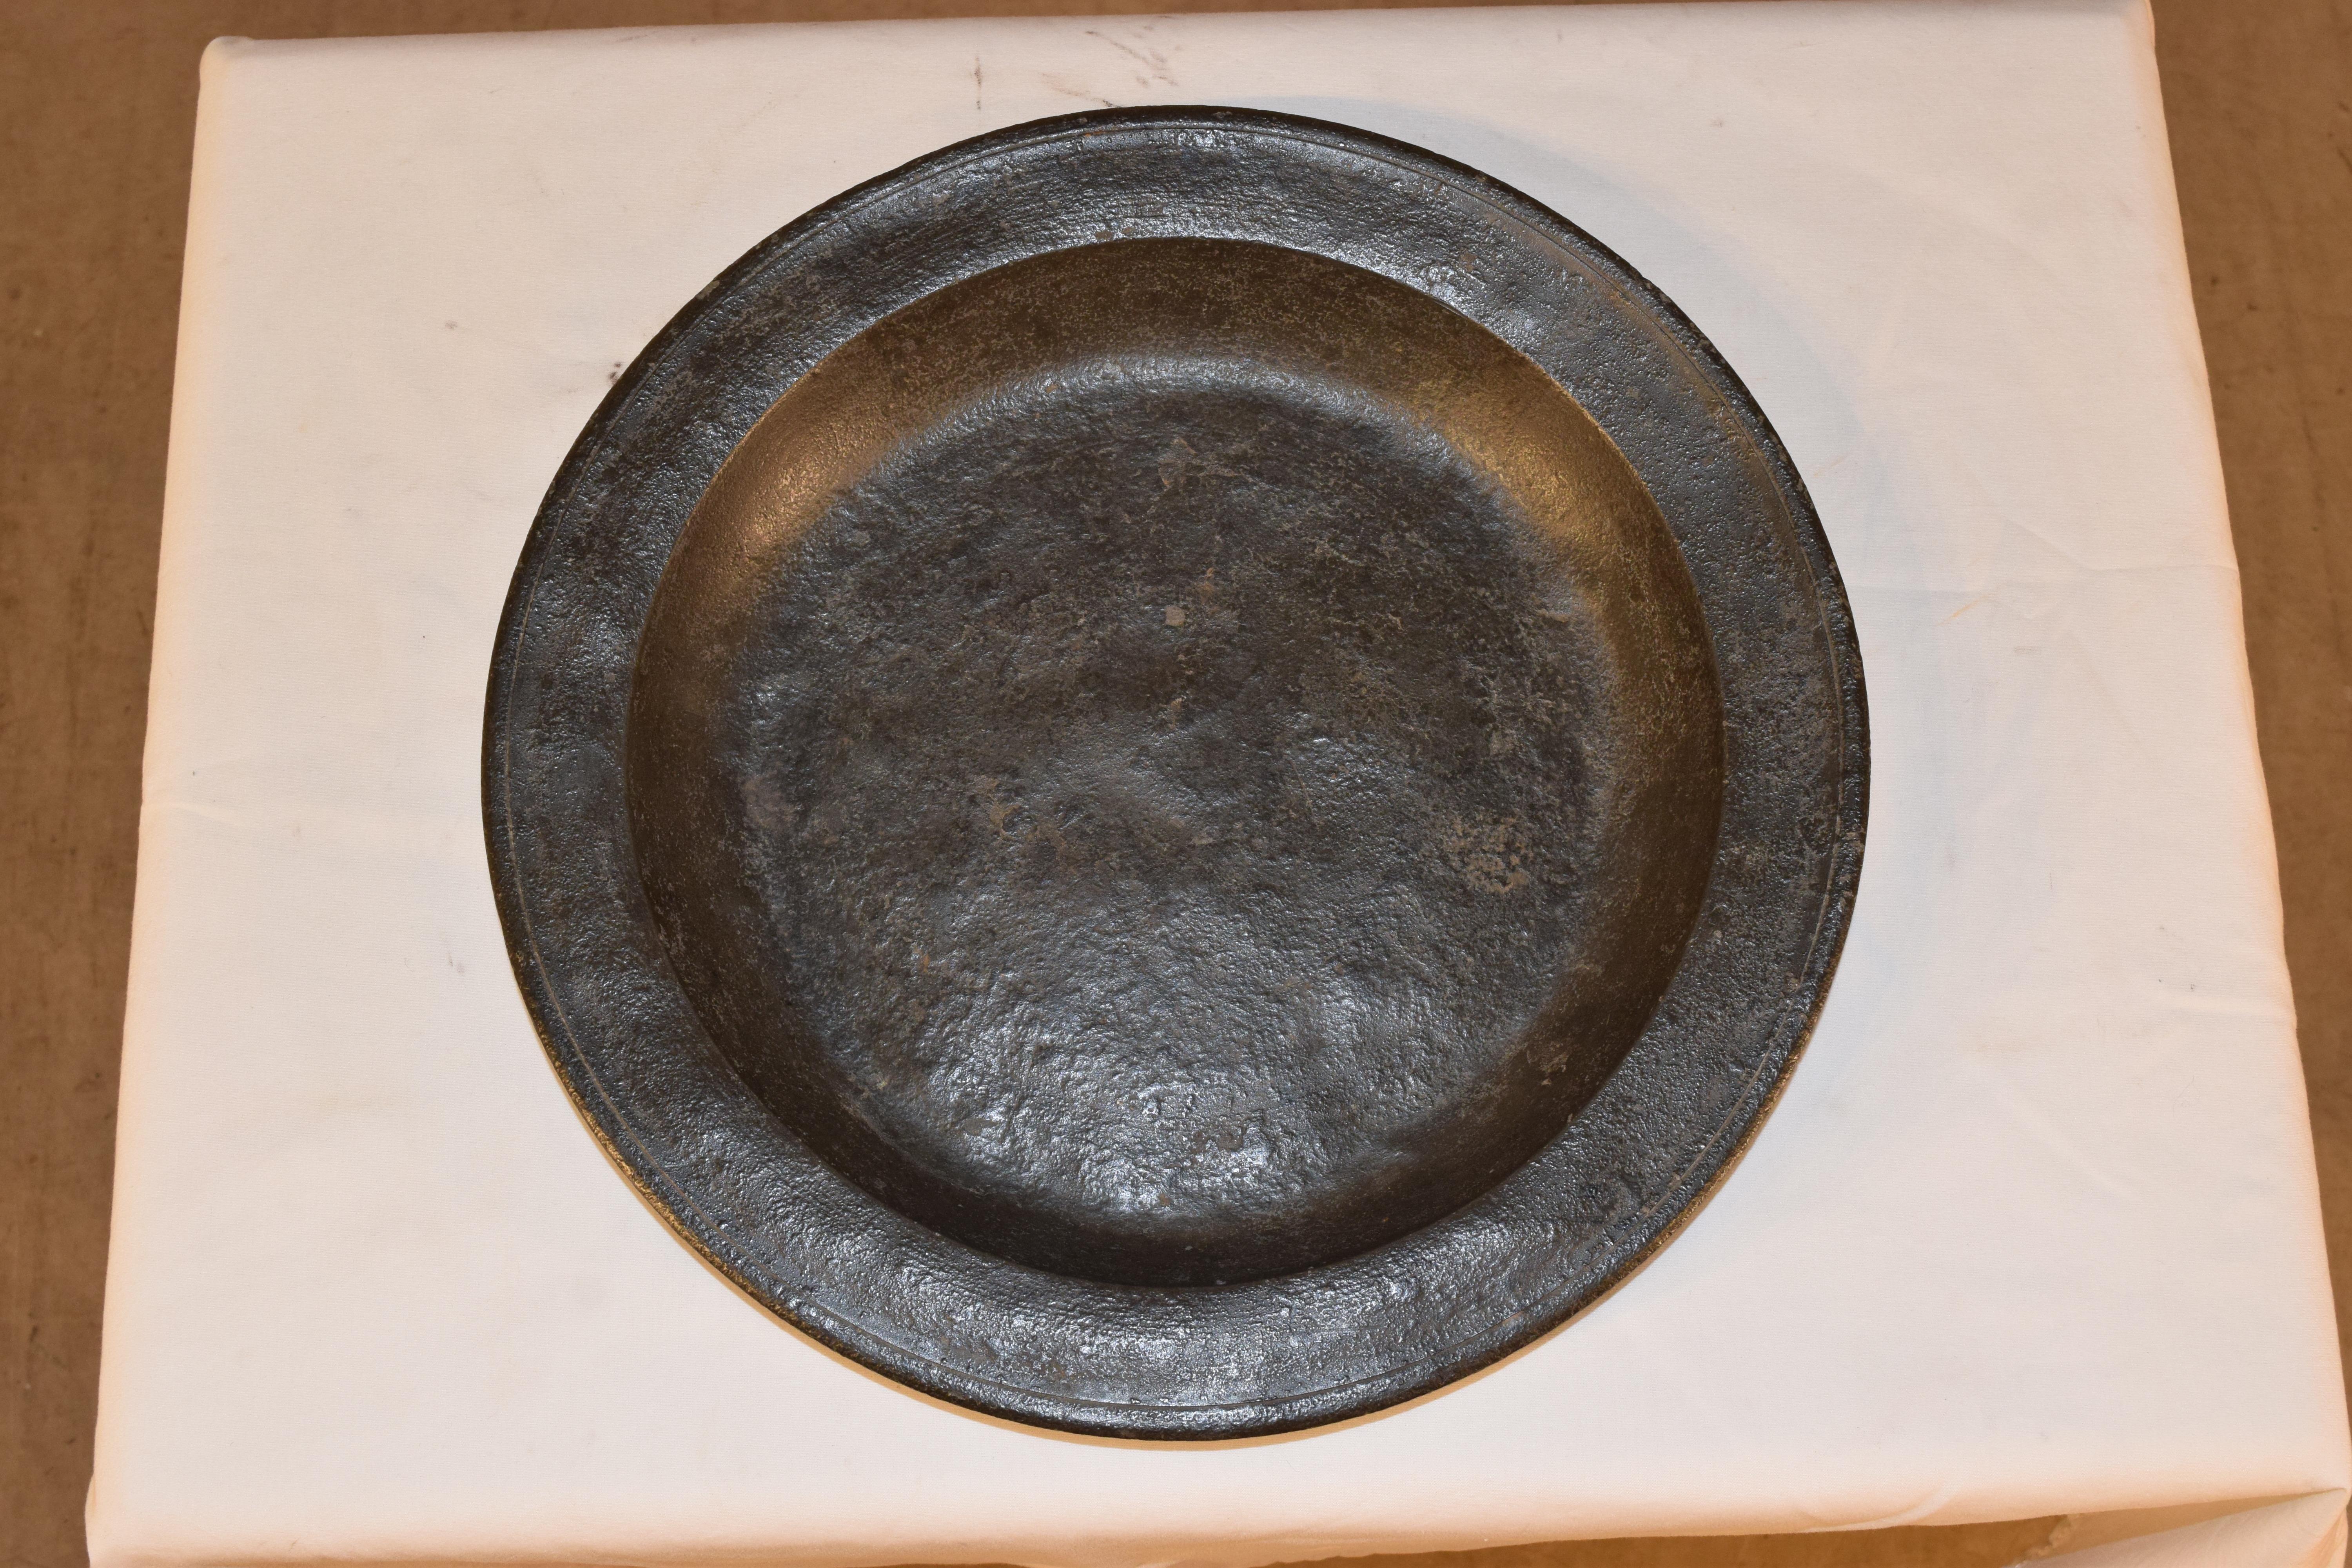 18th century pewter serving bowl from England with excellent patina.